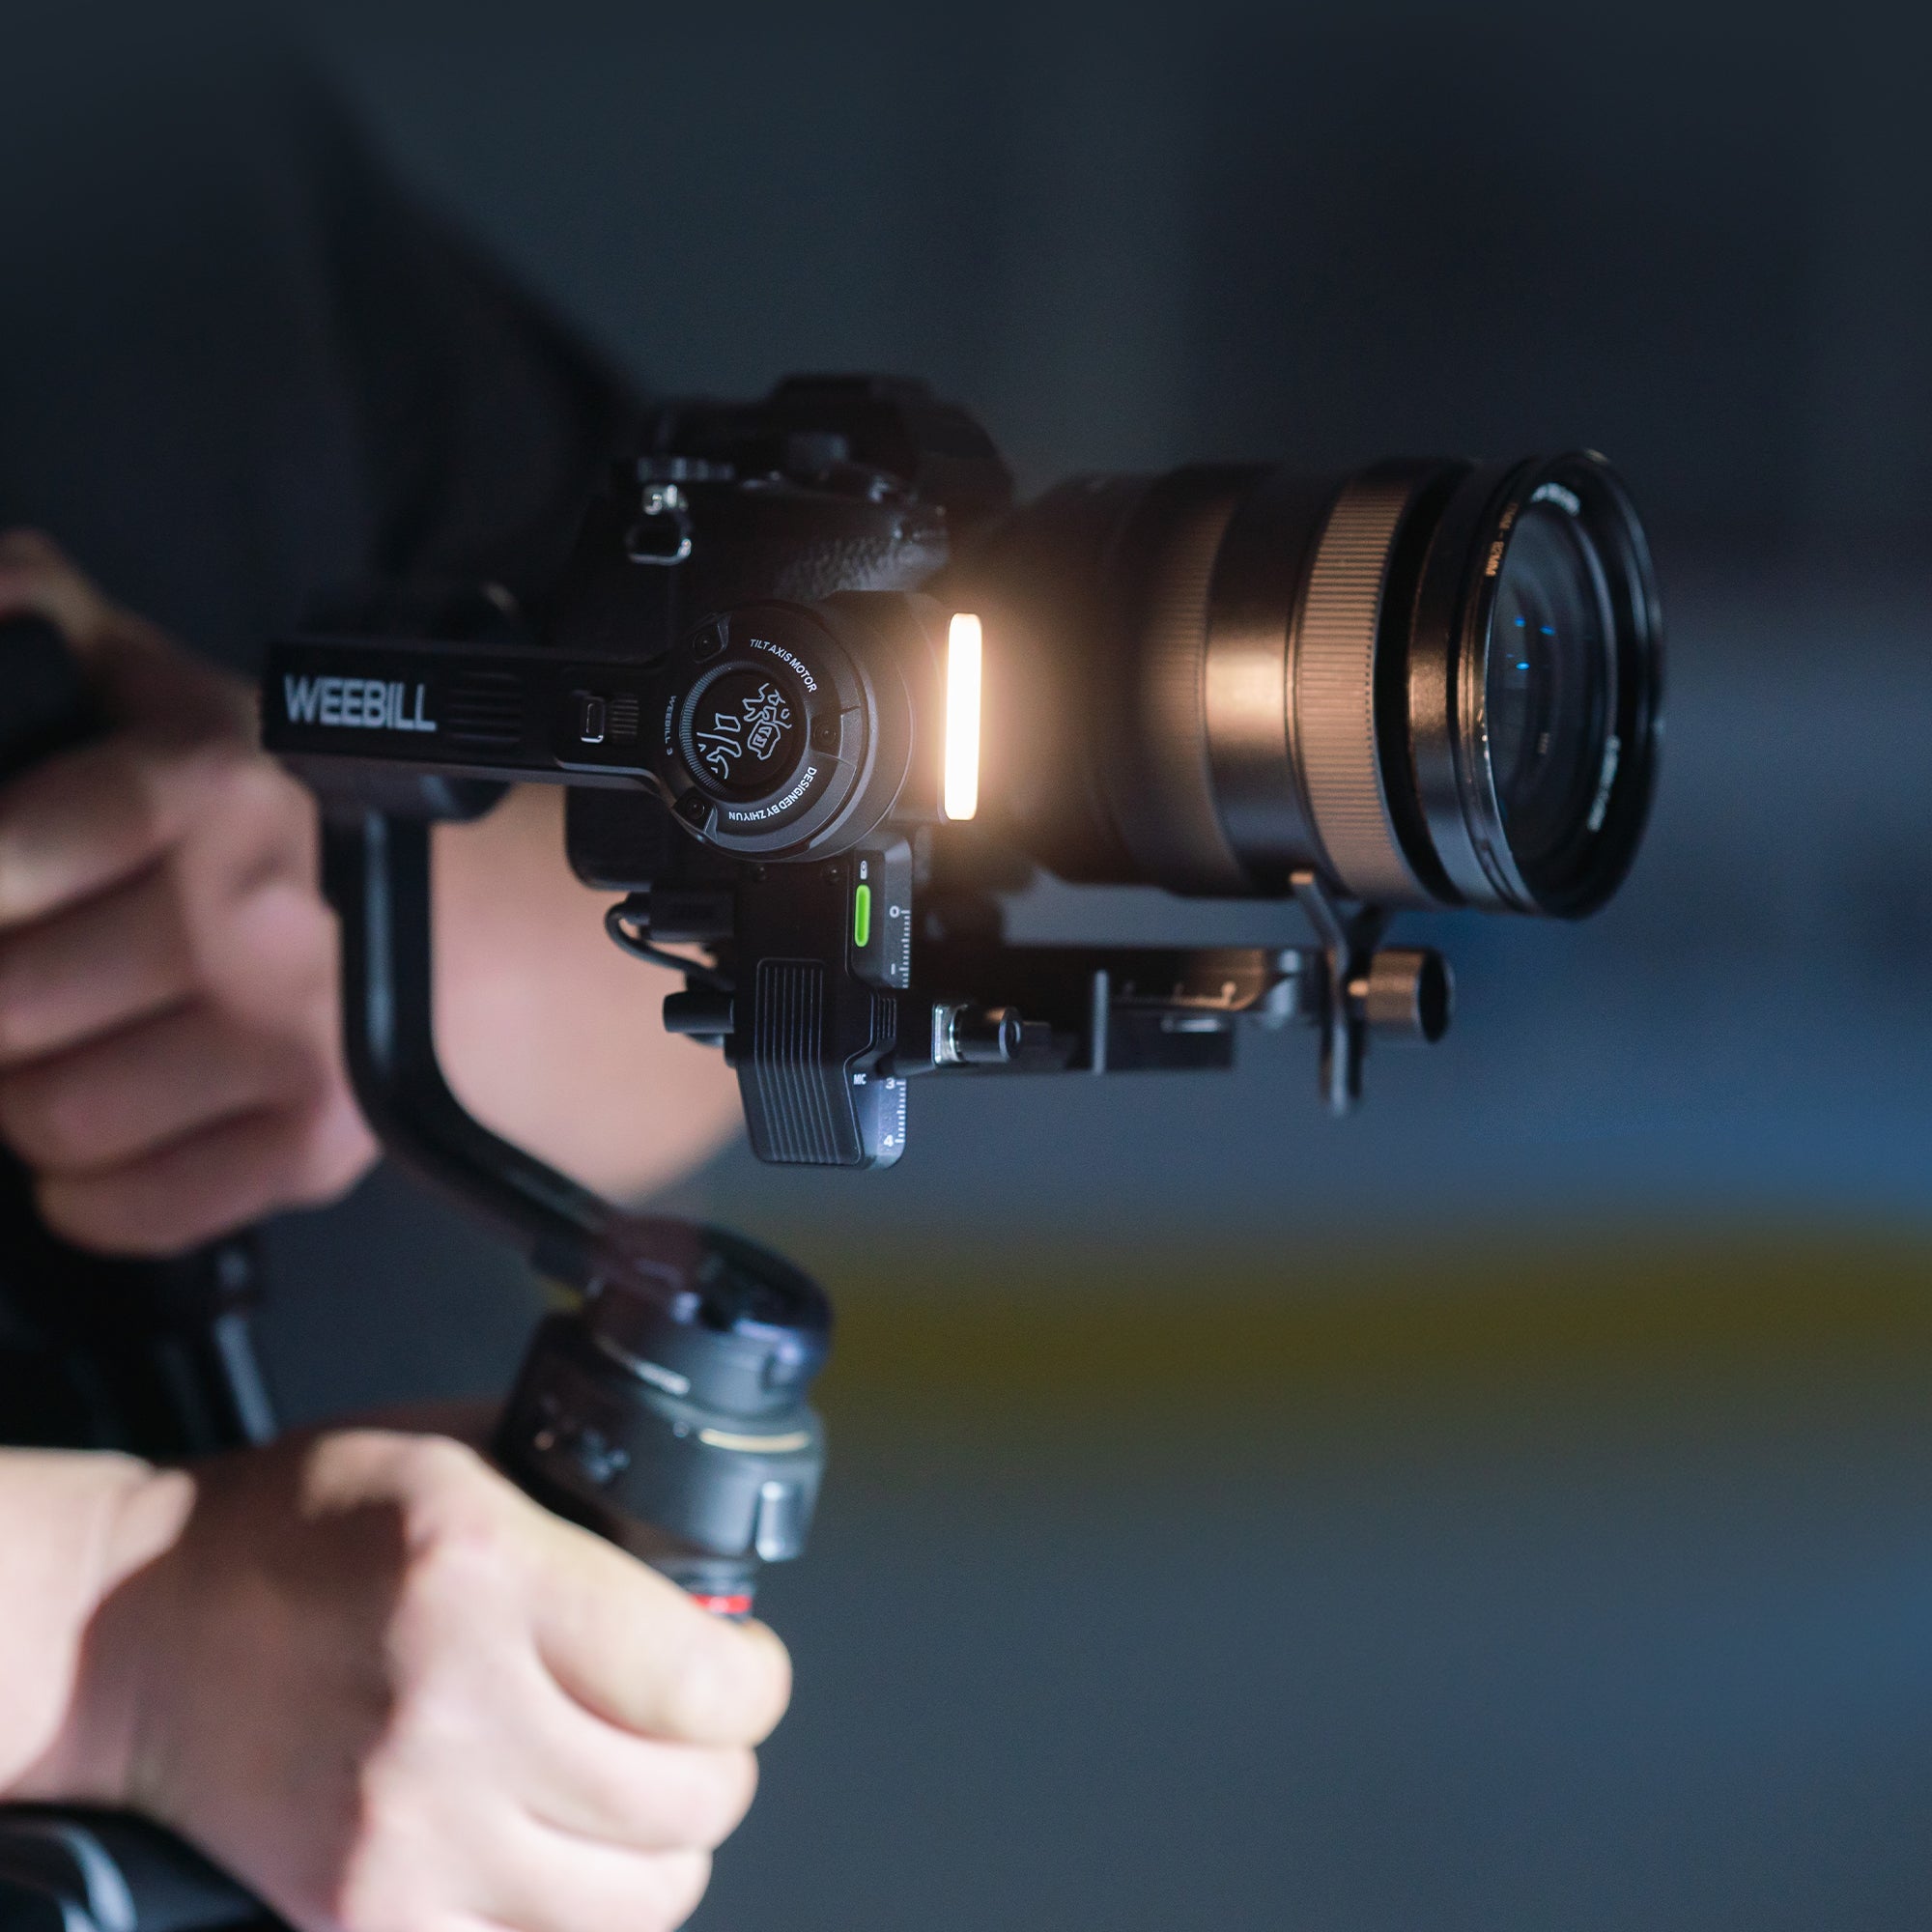 The built-in fill light and microphone give you an incredible efficient filming experience than ever